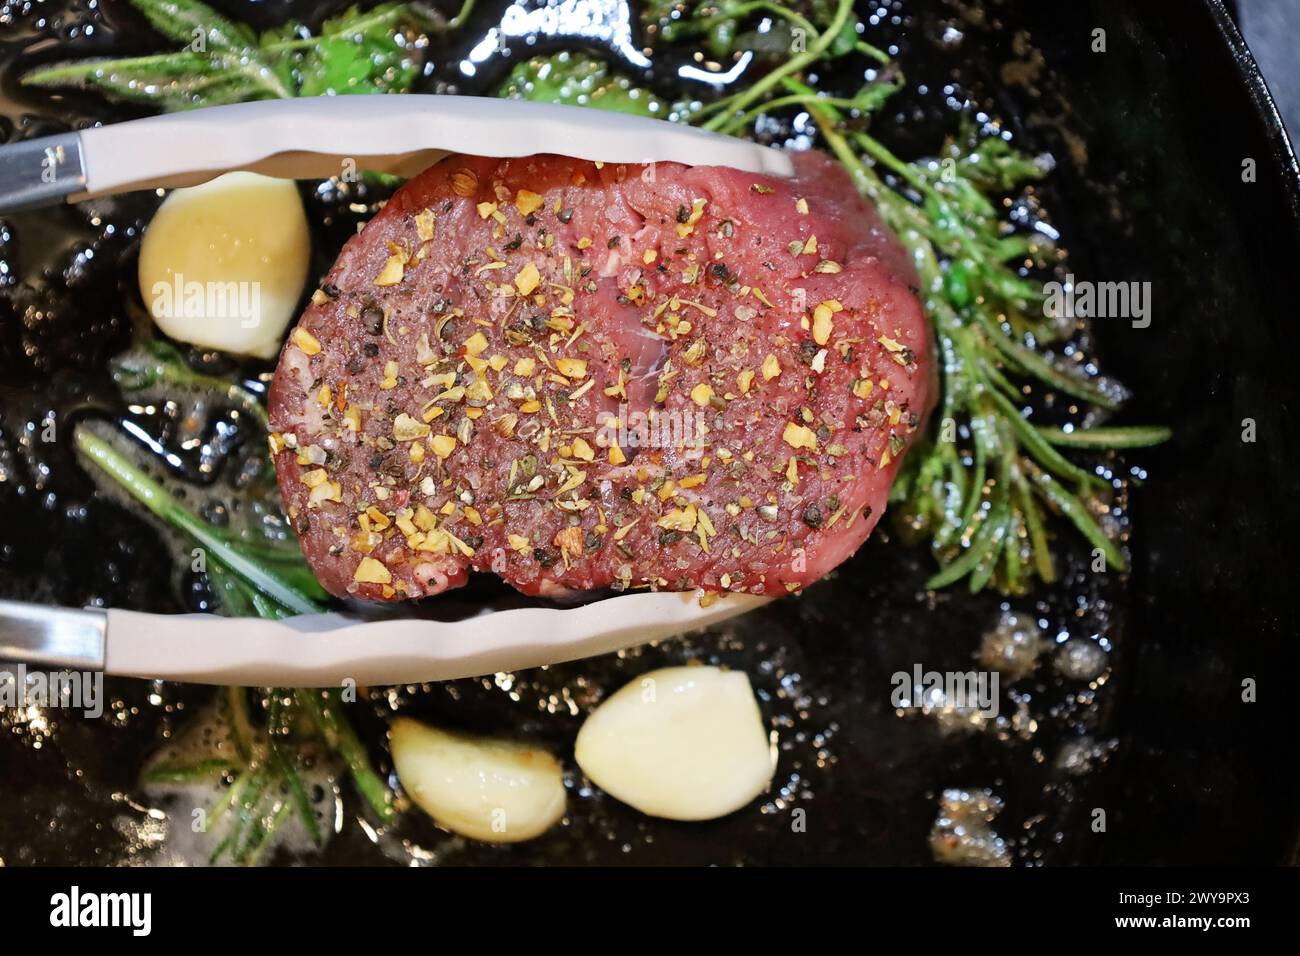 Tongs around a steak with herbs searing in a cast iron skillet Stock Photo